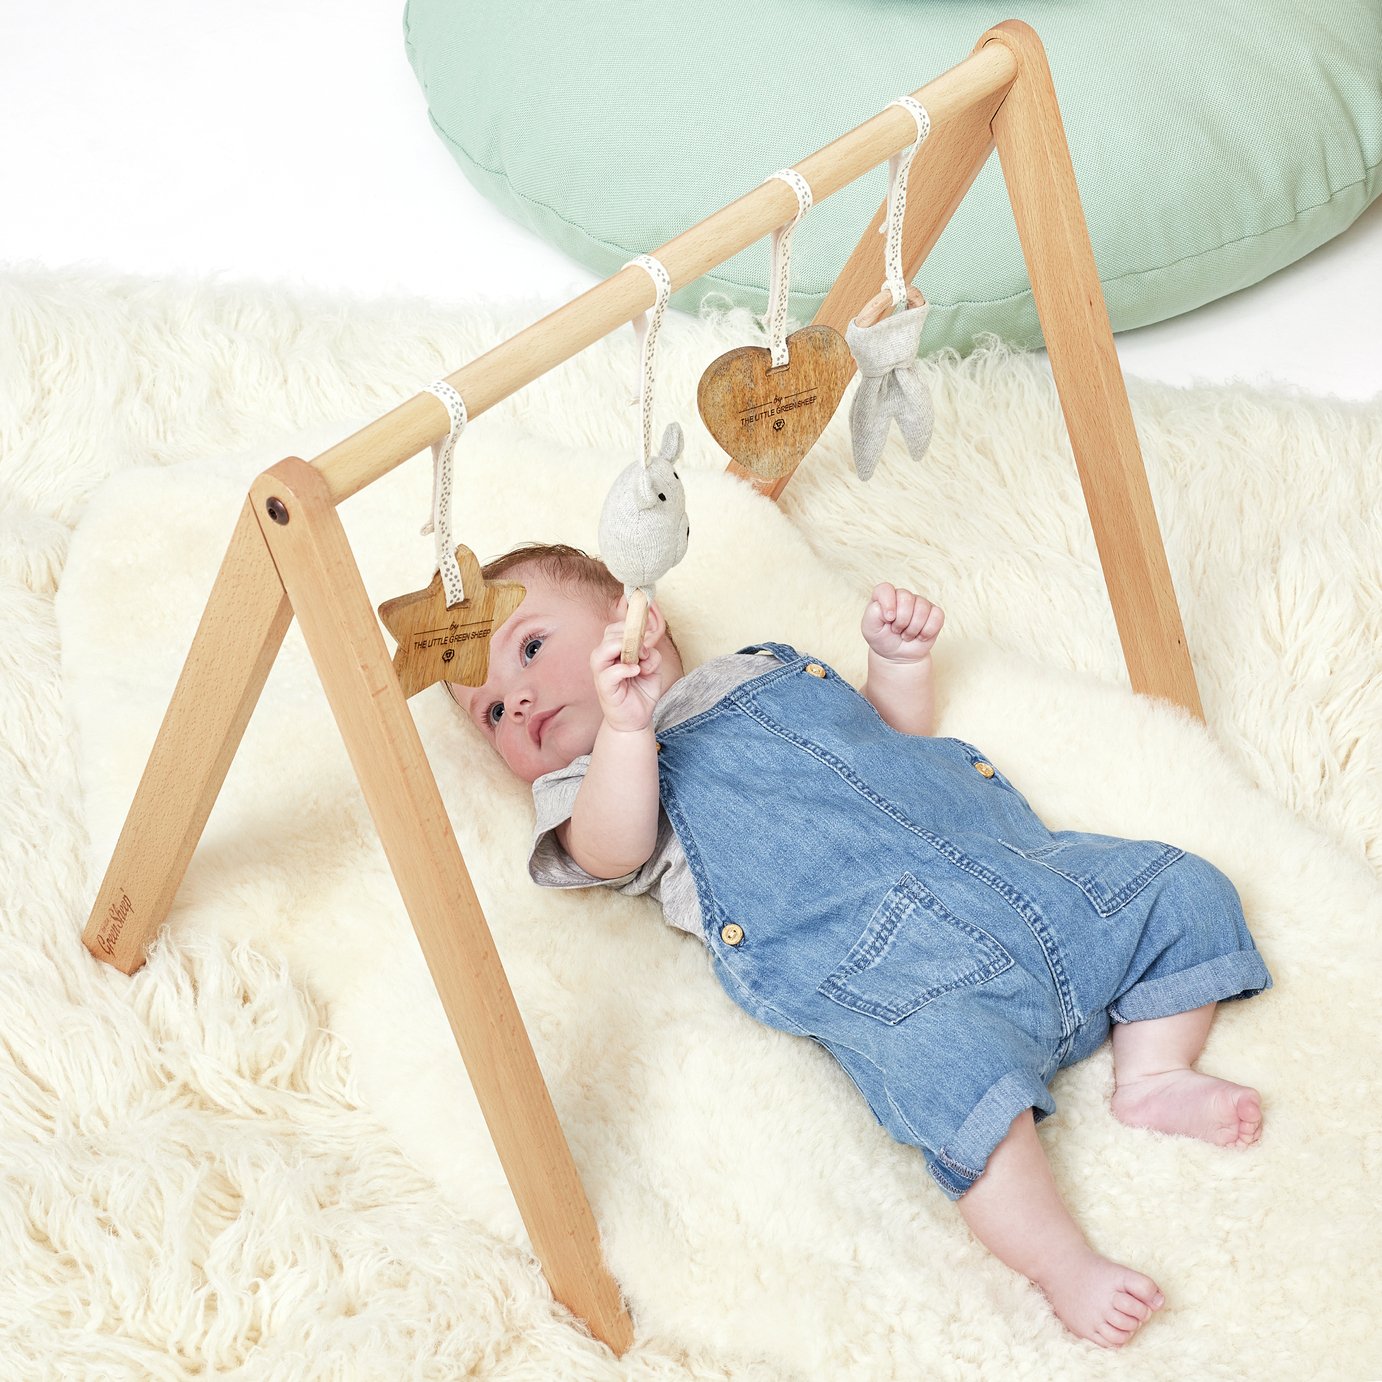 The Little Green Sheep Wooden Baby Play Gym & Charms Set Review